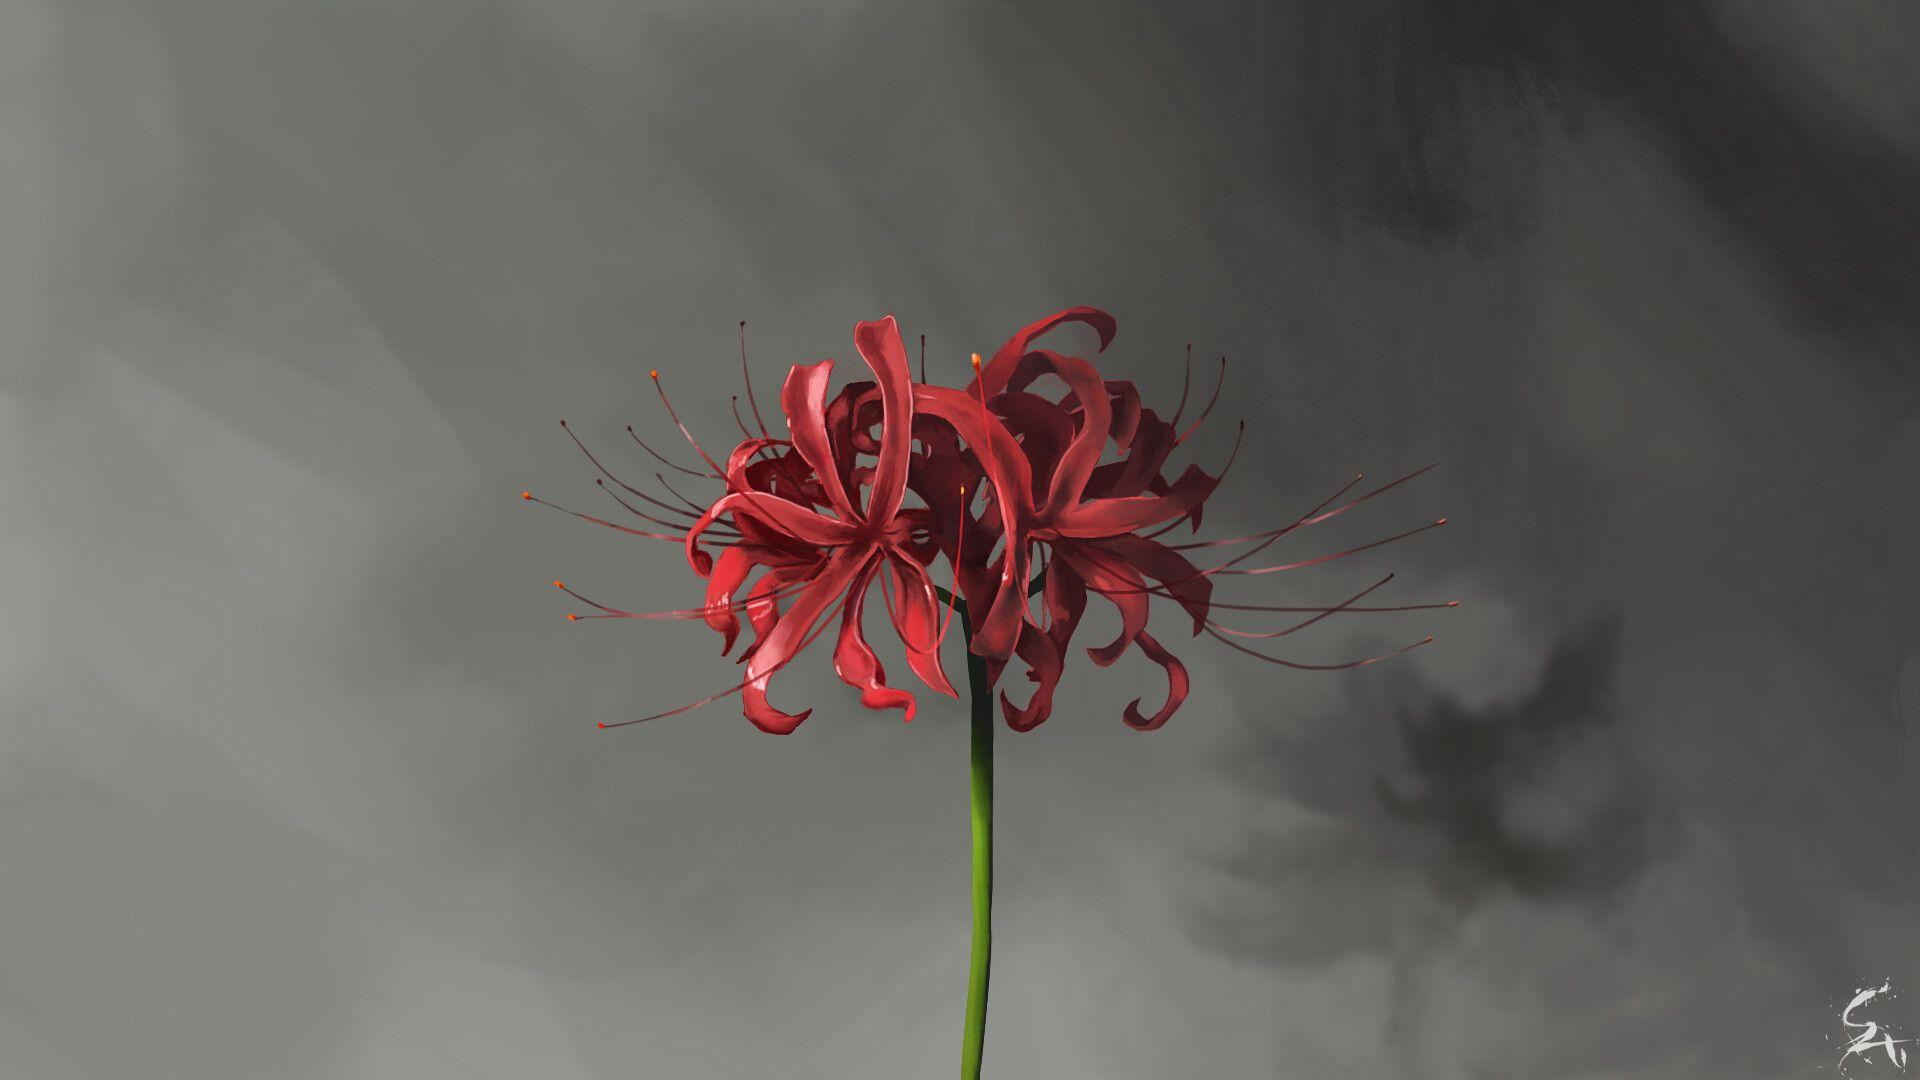 Black Hat Anime  Youll know some sad shit is gonna happen when this flower  shows up in the anime youre watching  Facebook